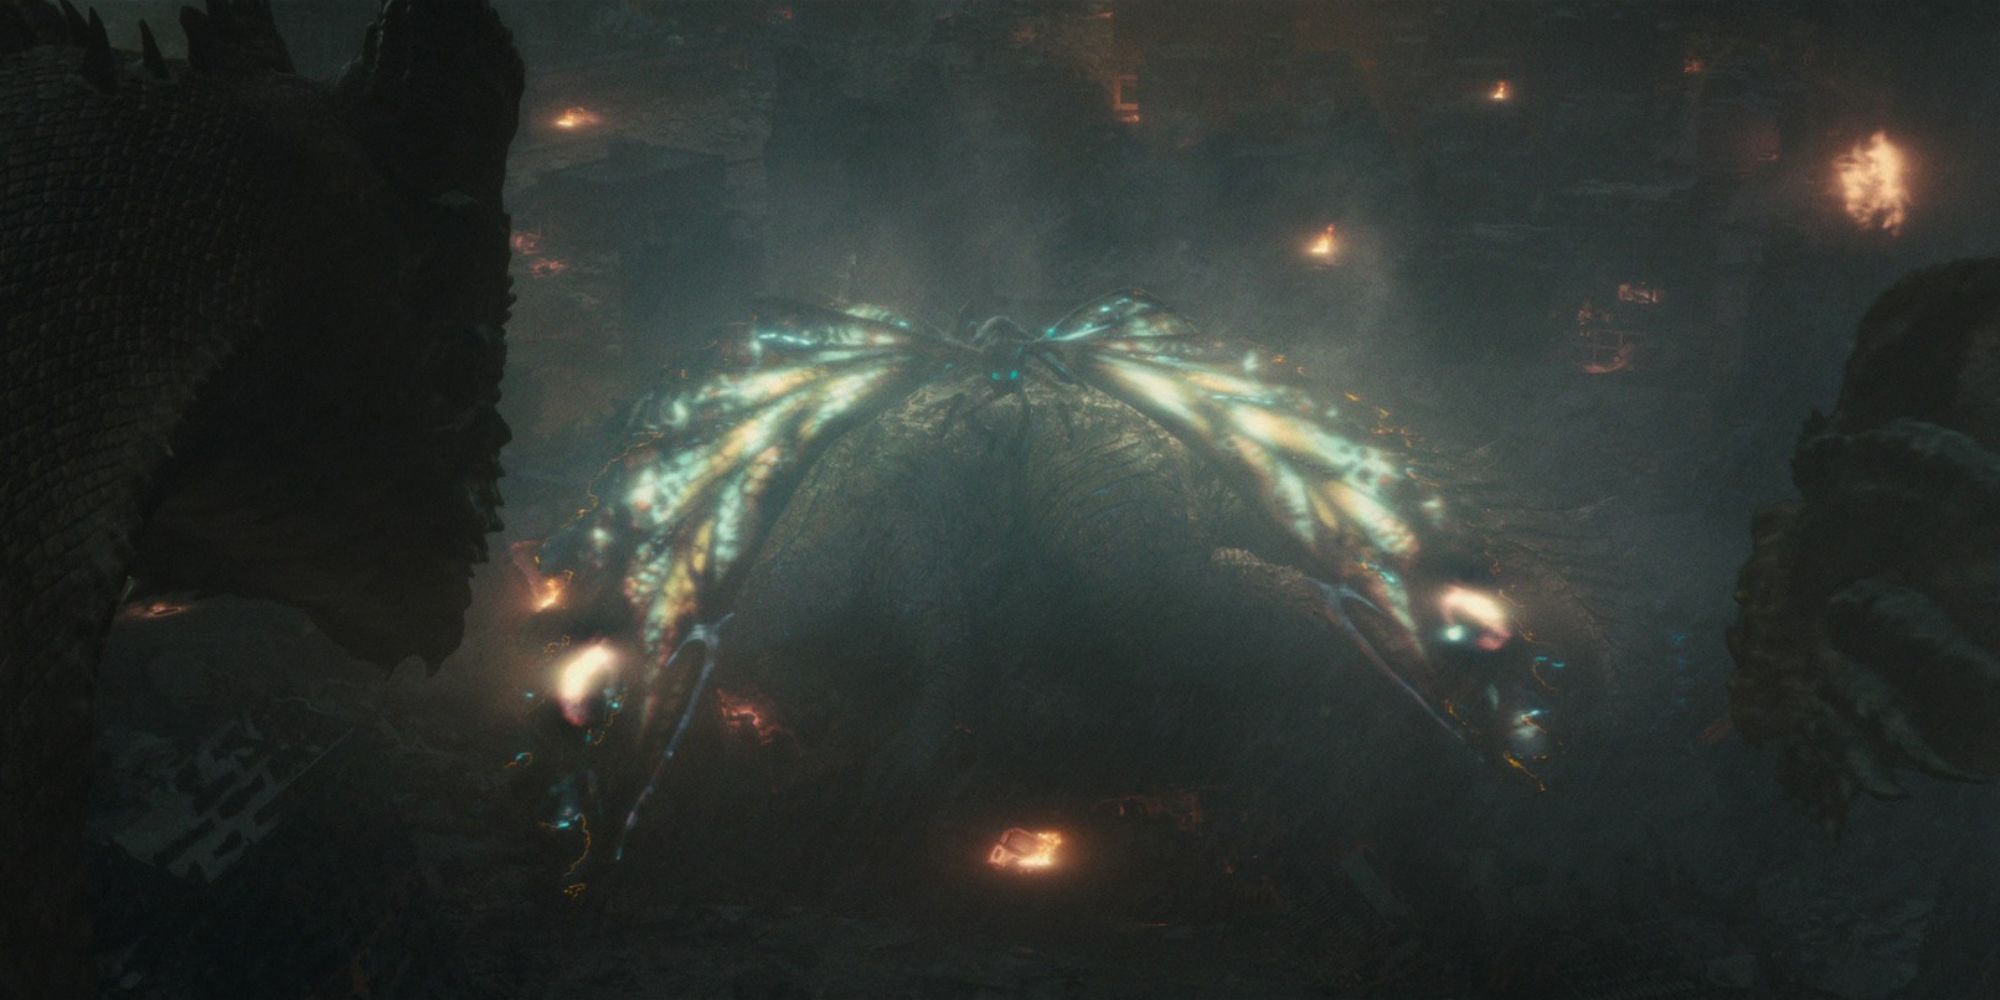 Mothra protects Godzilla from King Ghidorah's attack in Godzilla: King of the Monsters